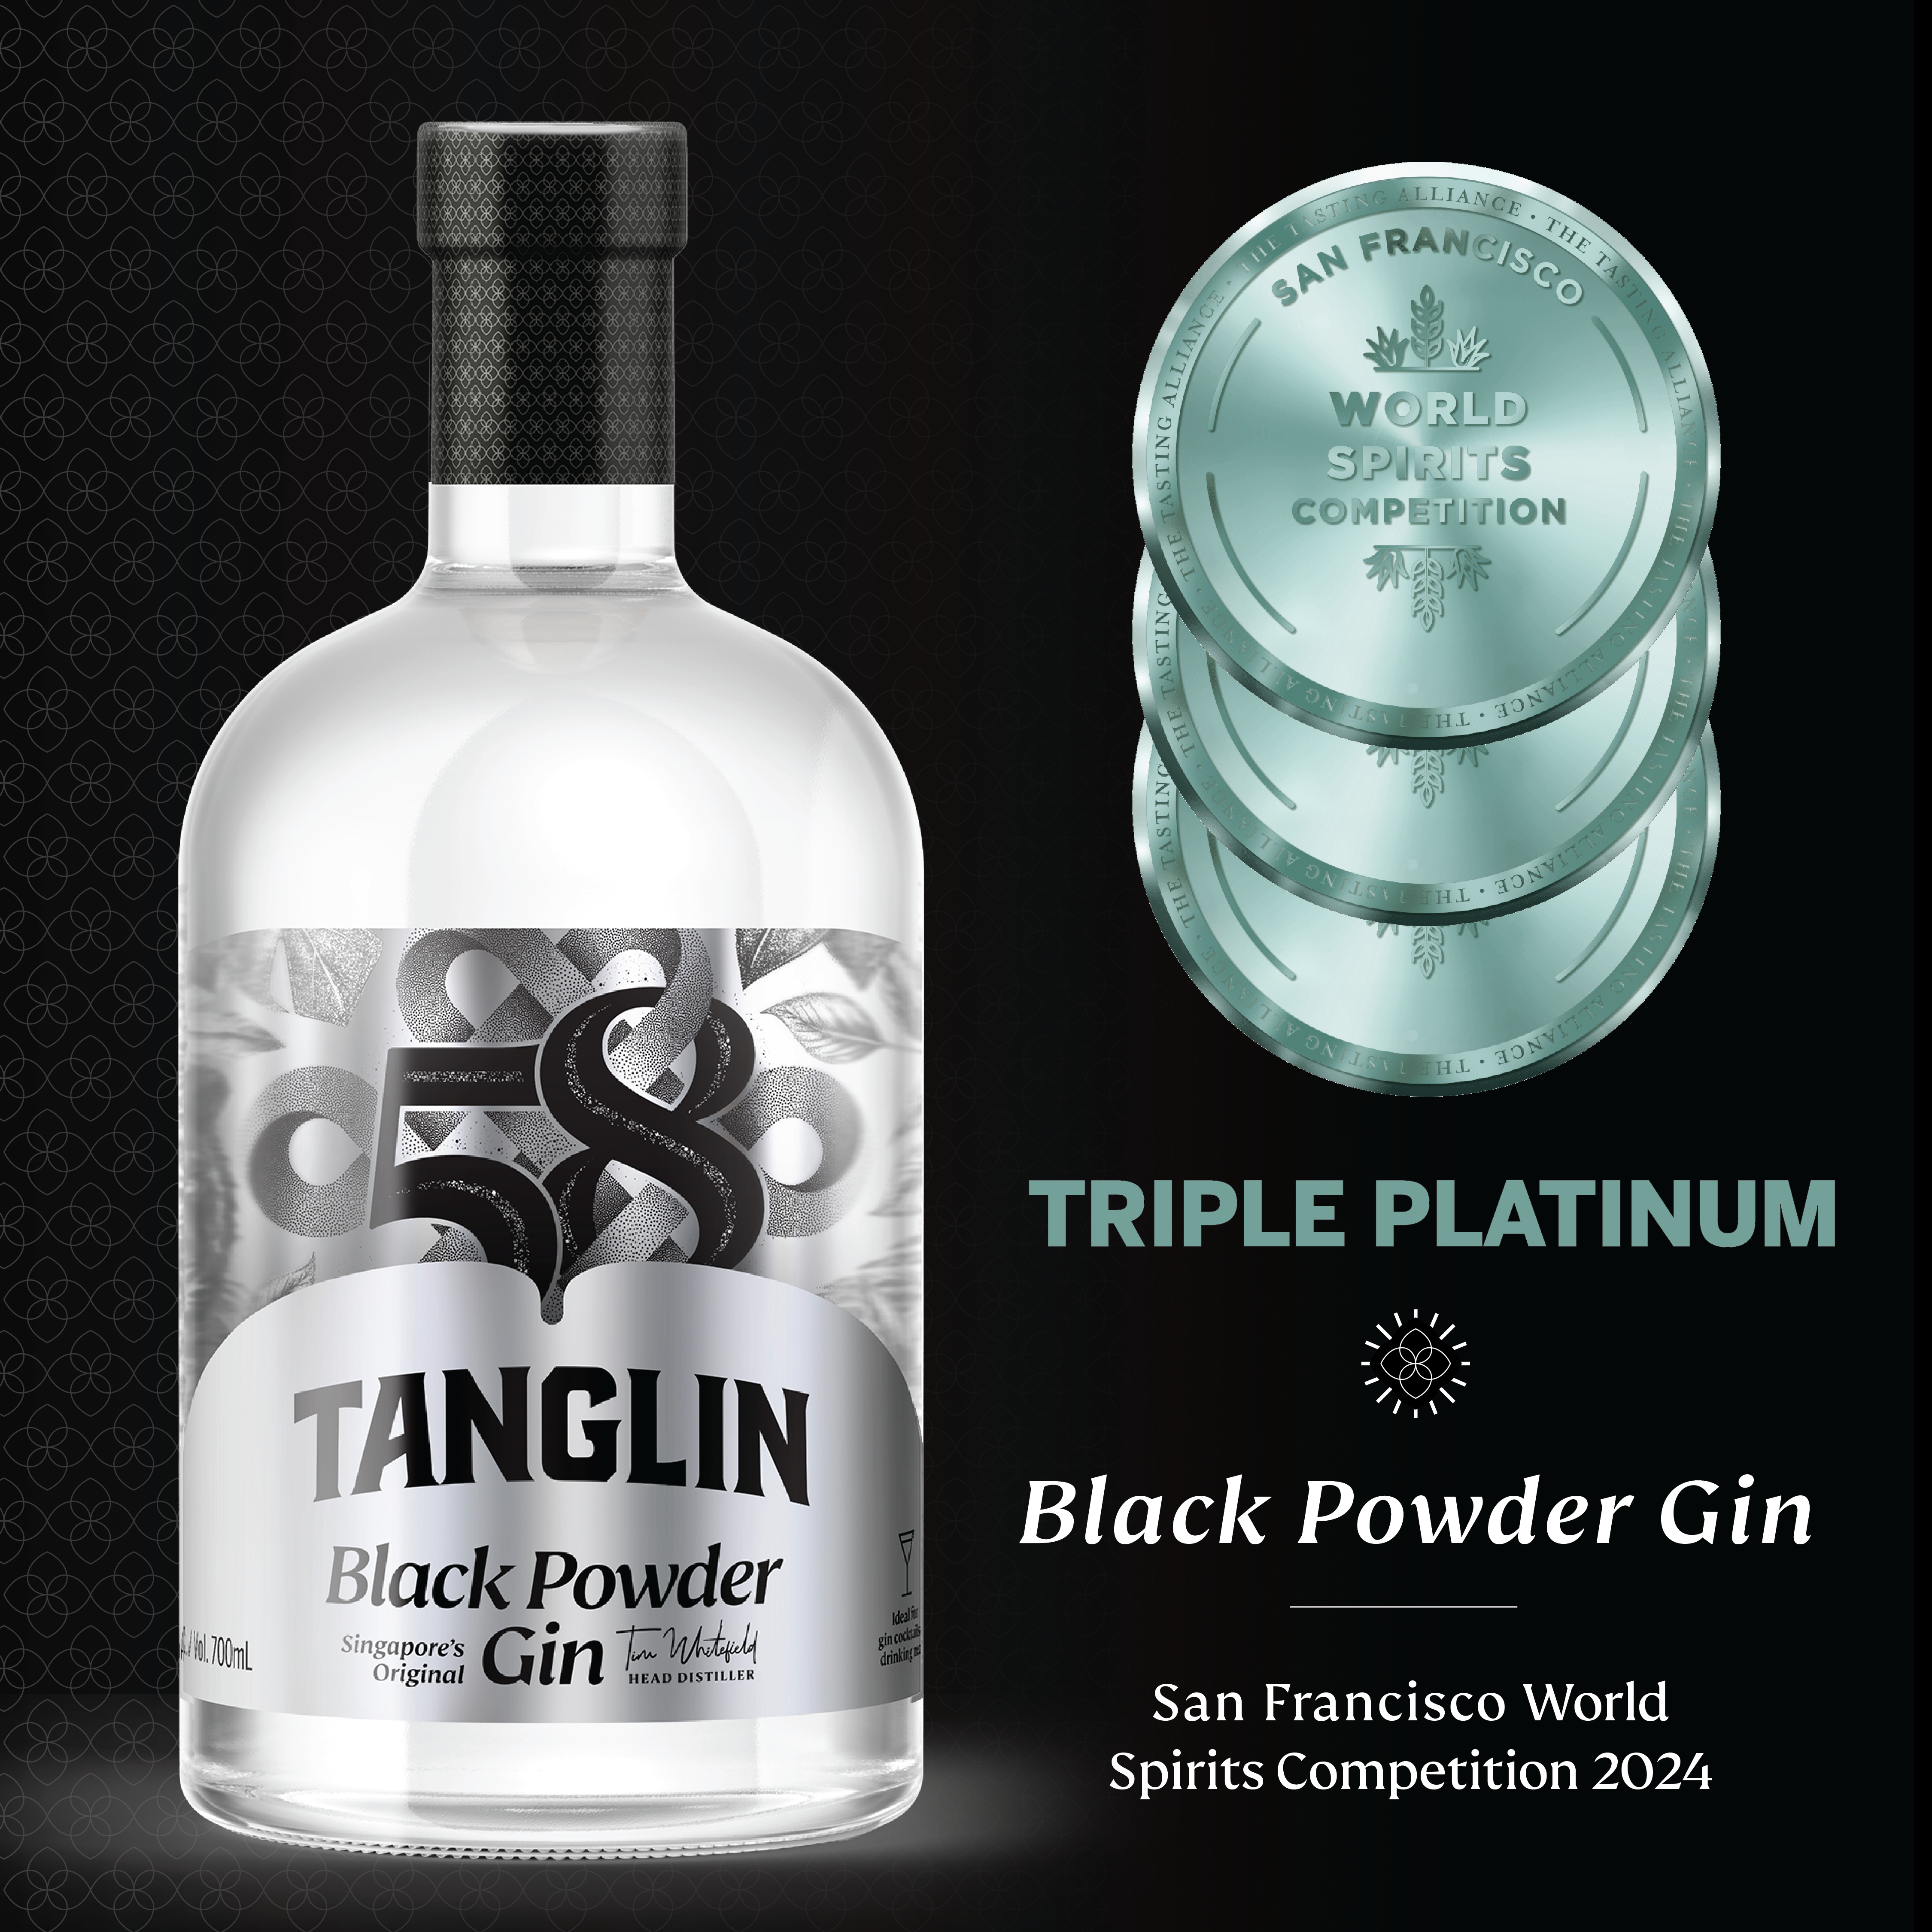 Tanglin Black Powder Gin secured a robust 95 points